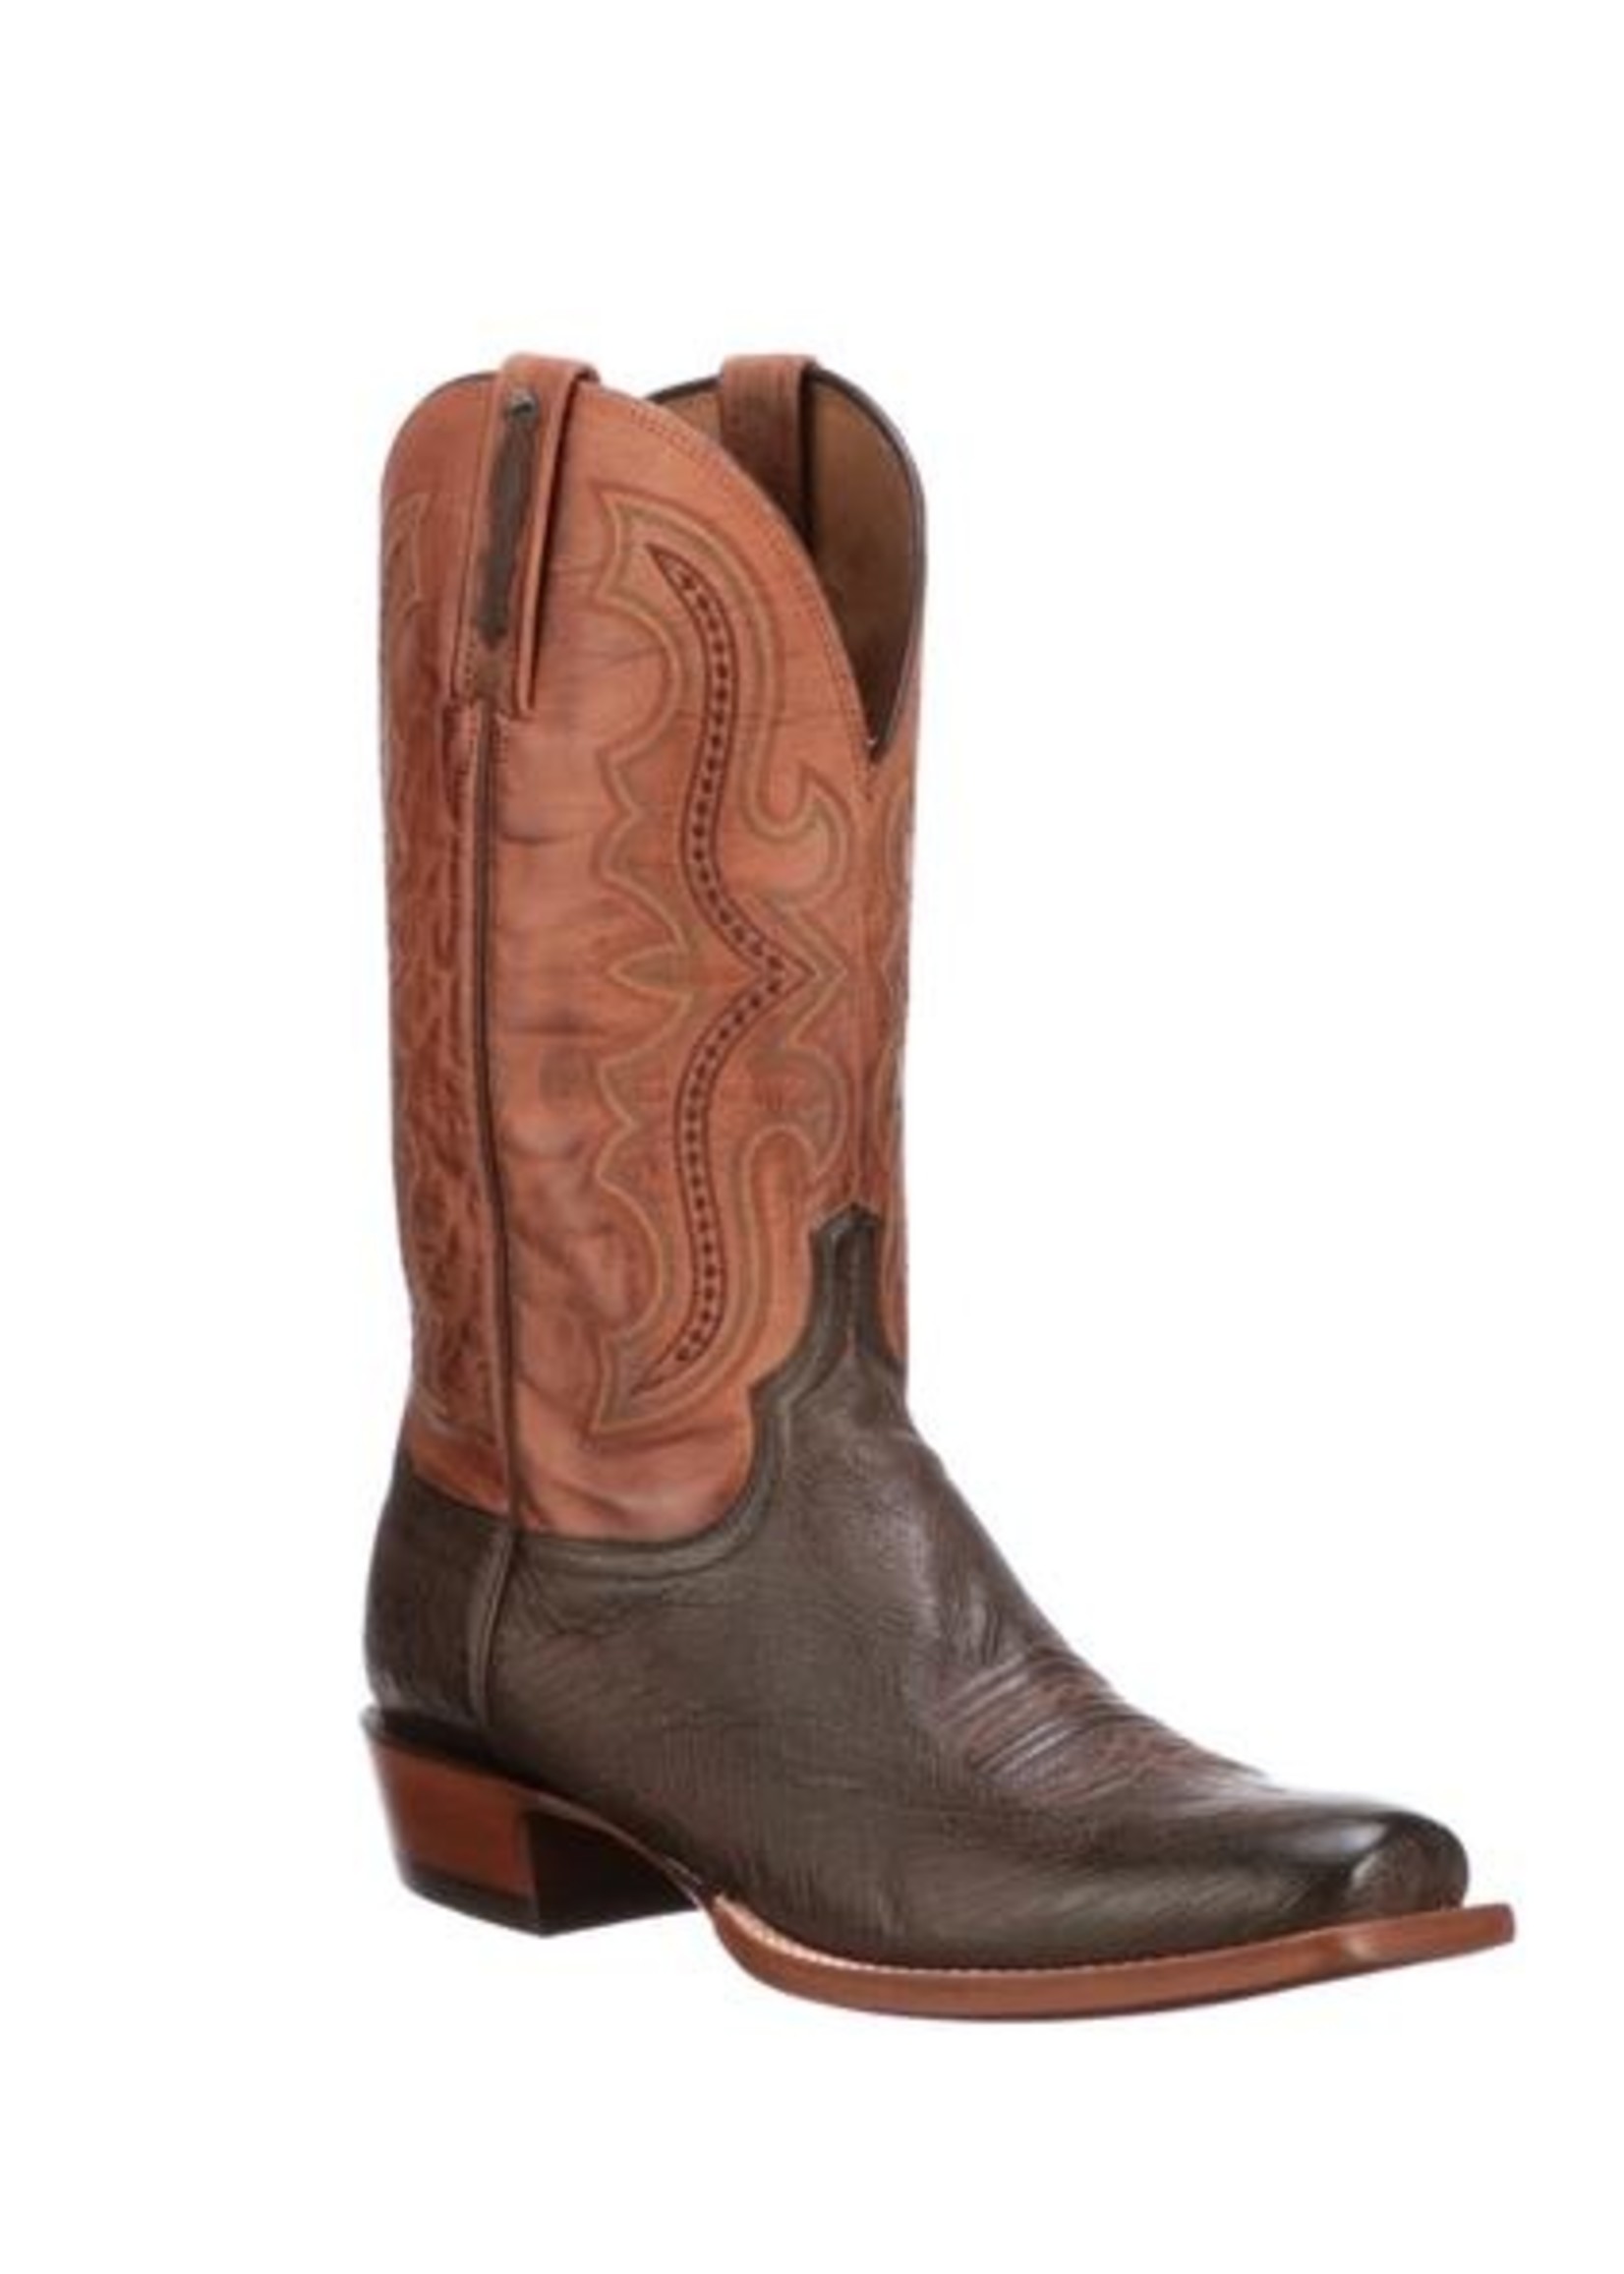 Boots-Men LUCCHESE CL1094.Q8 Cecil